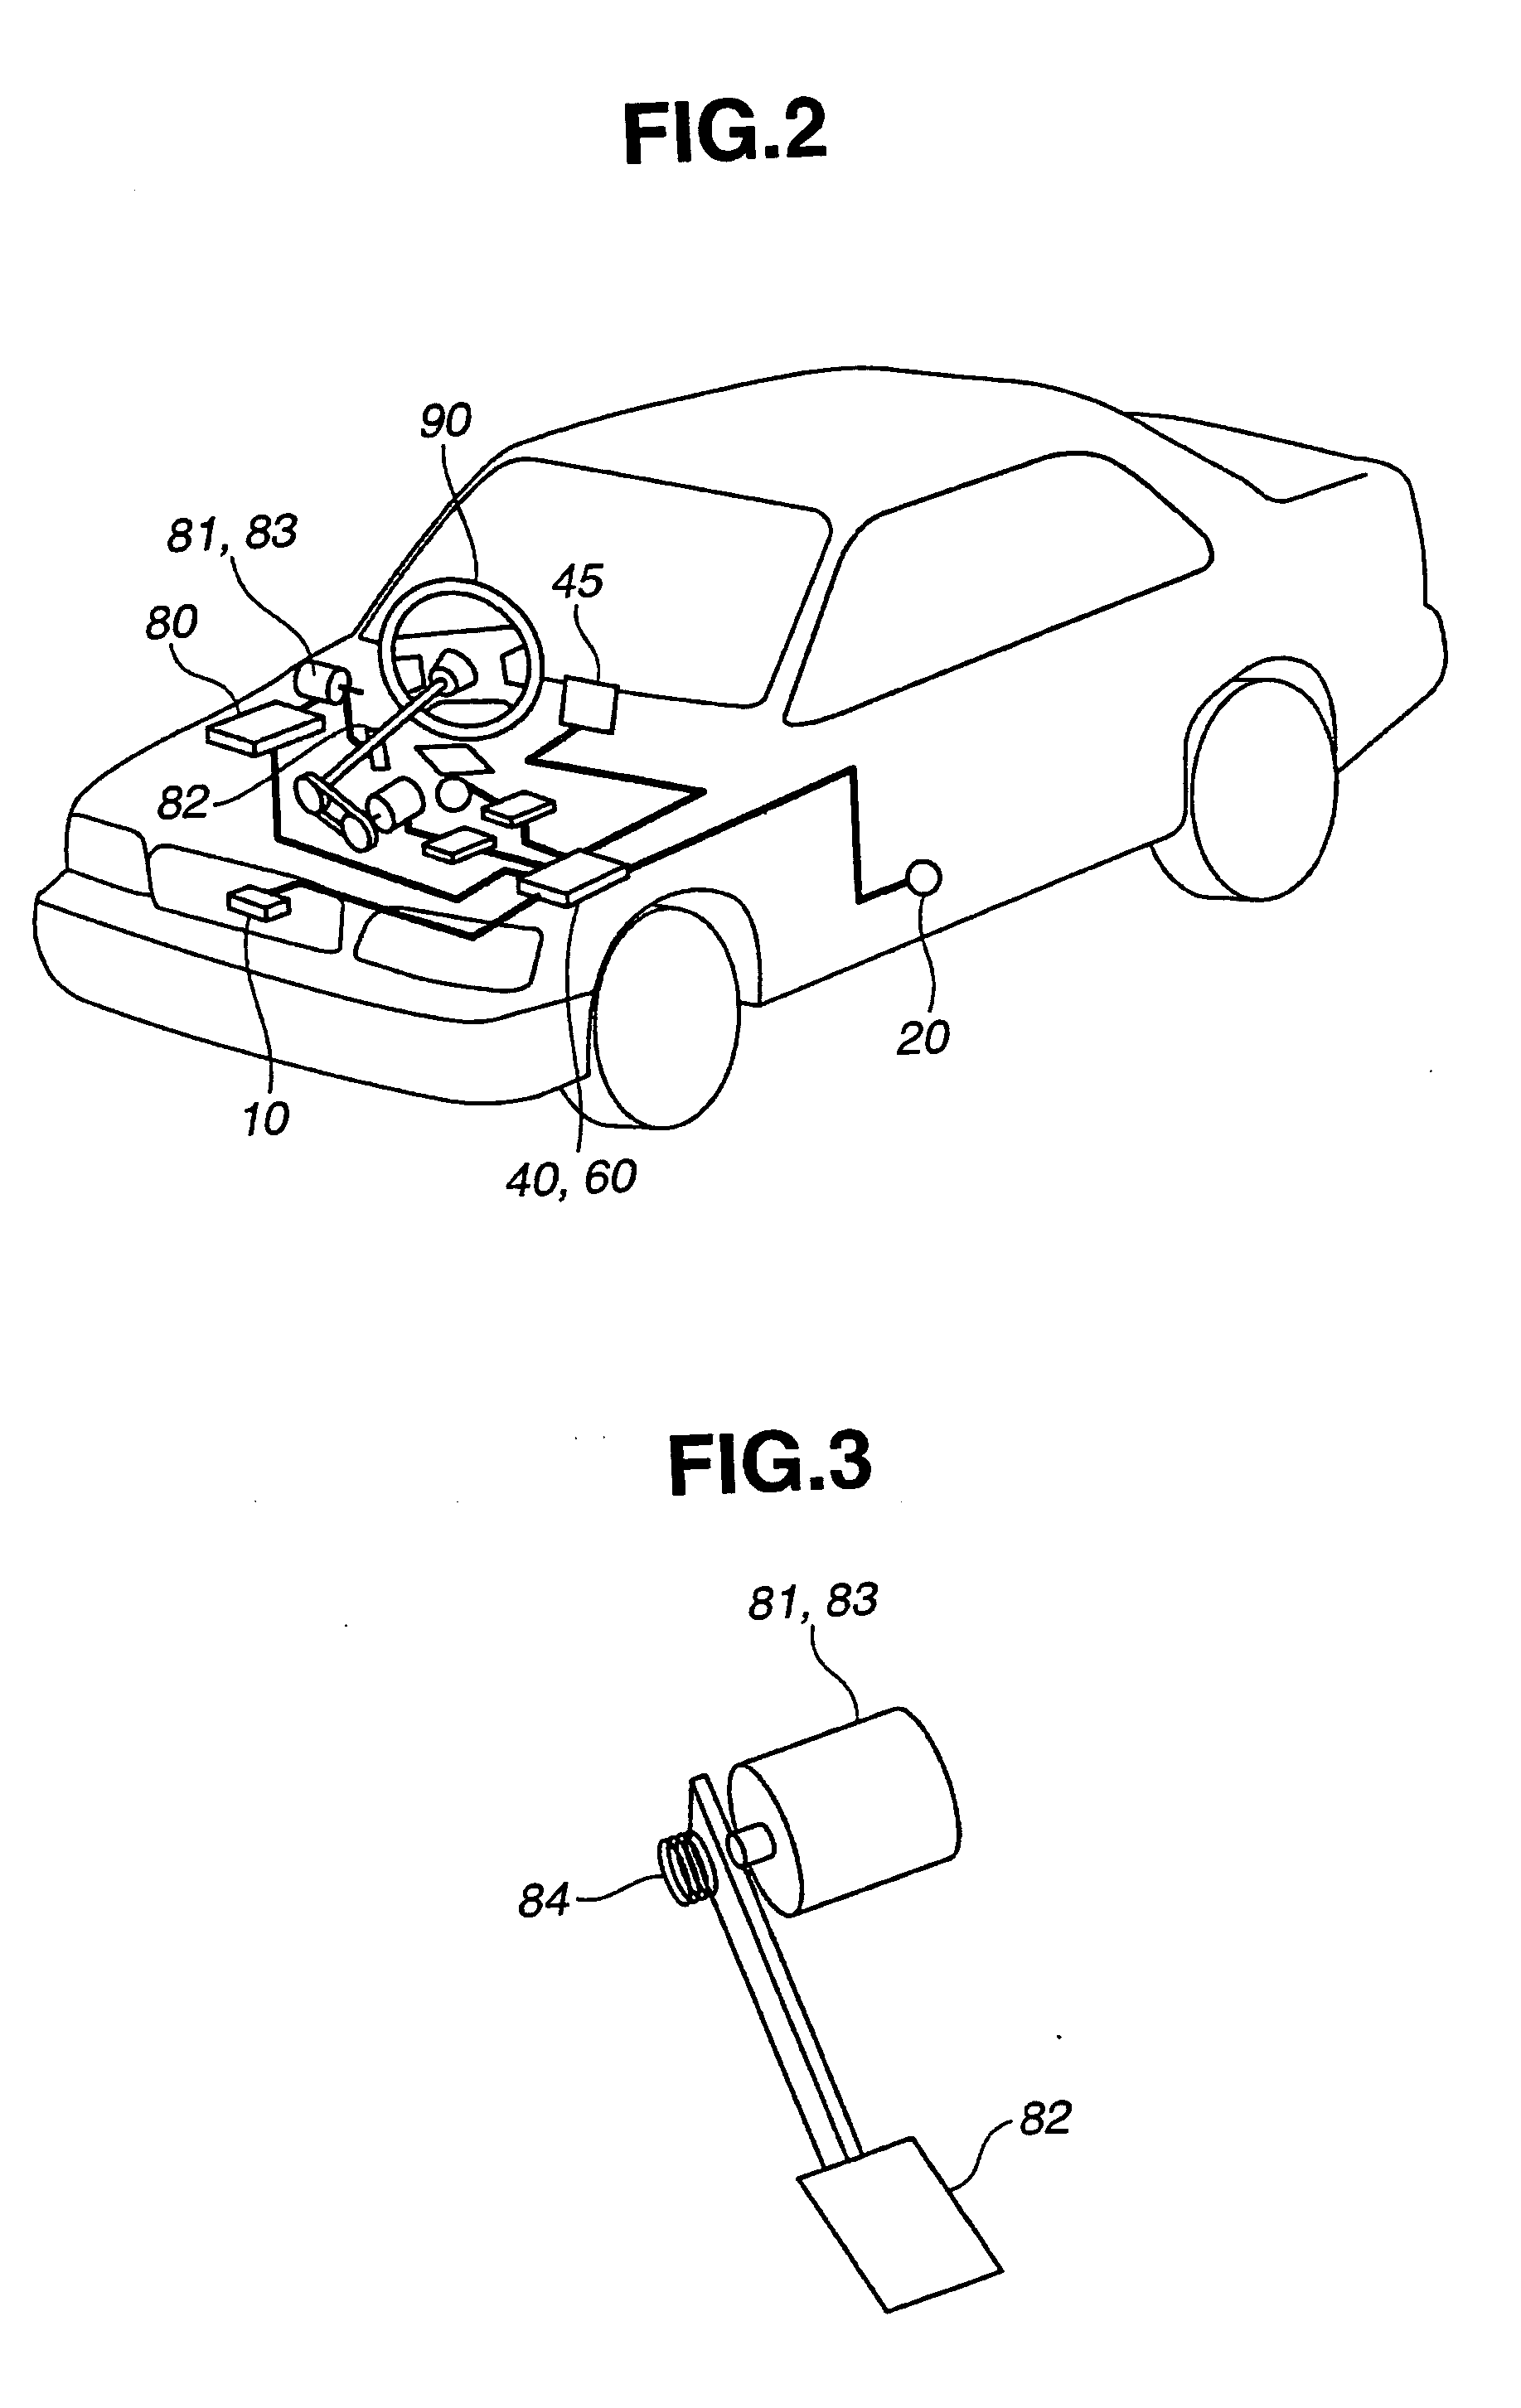 Driver assisting system, method for assisting driver, and vehicle incorporating same